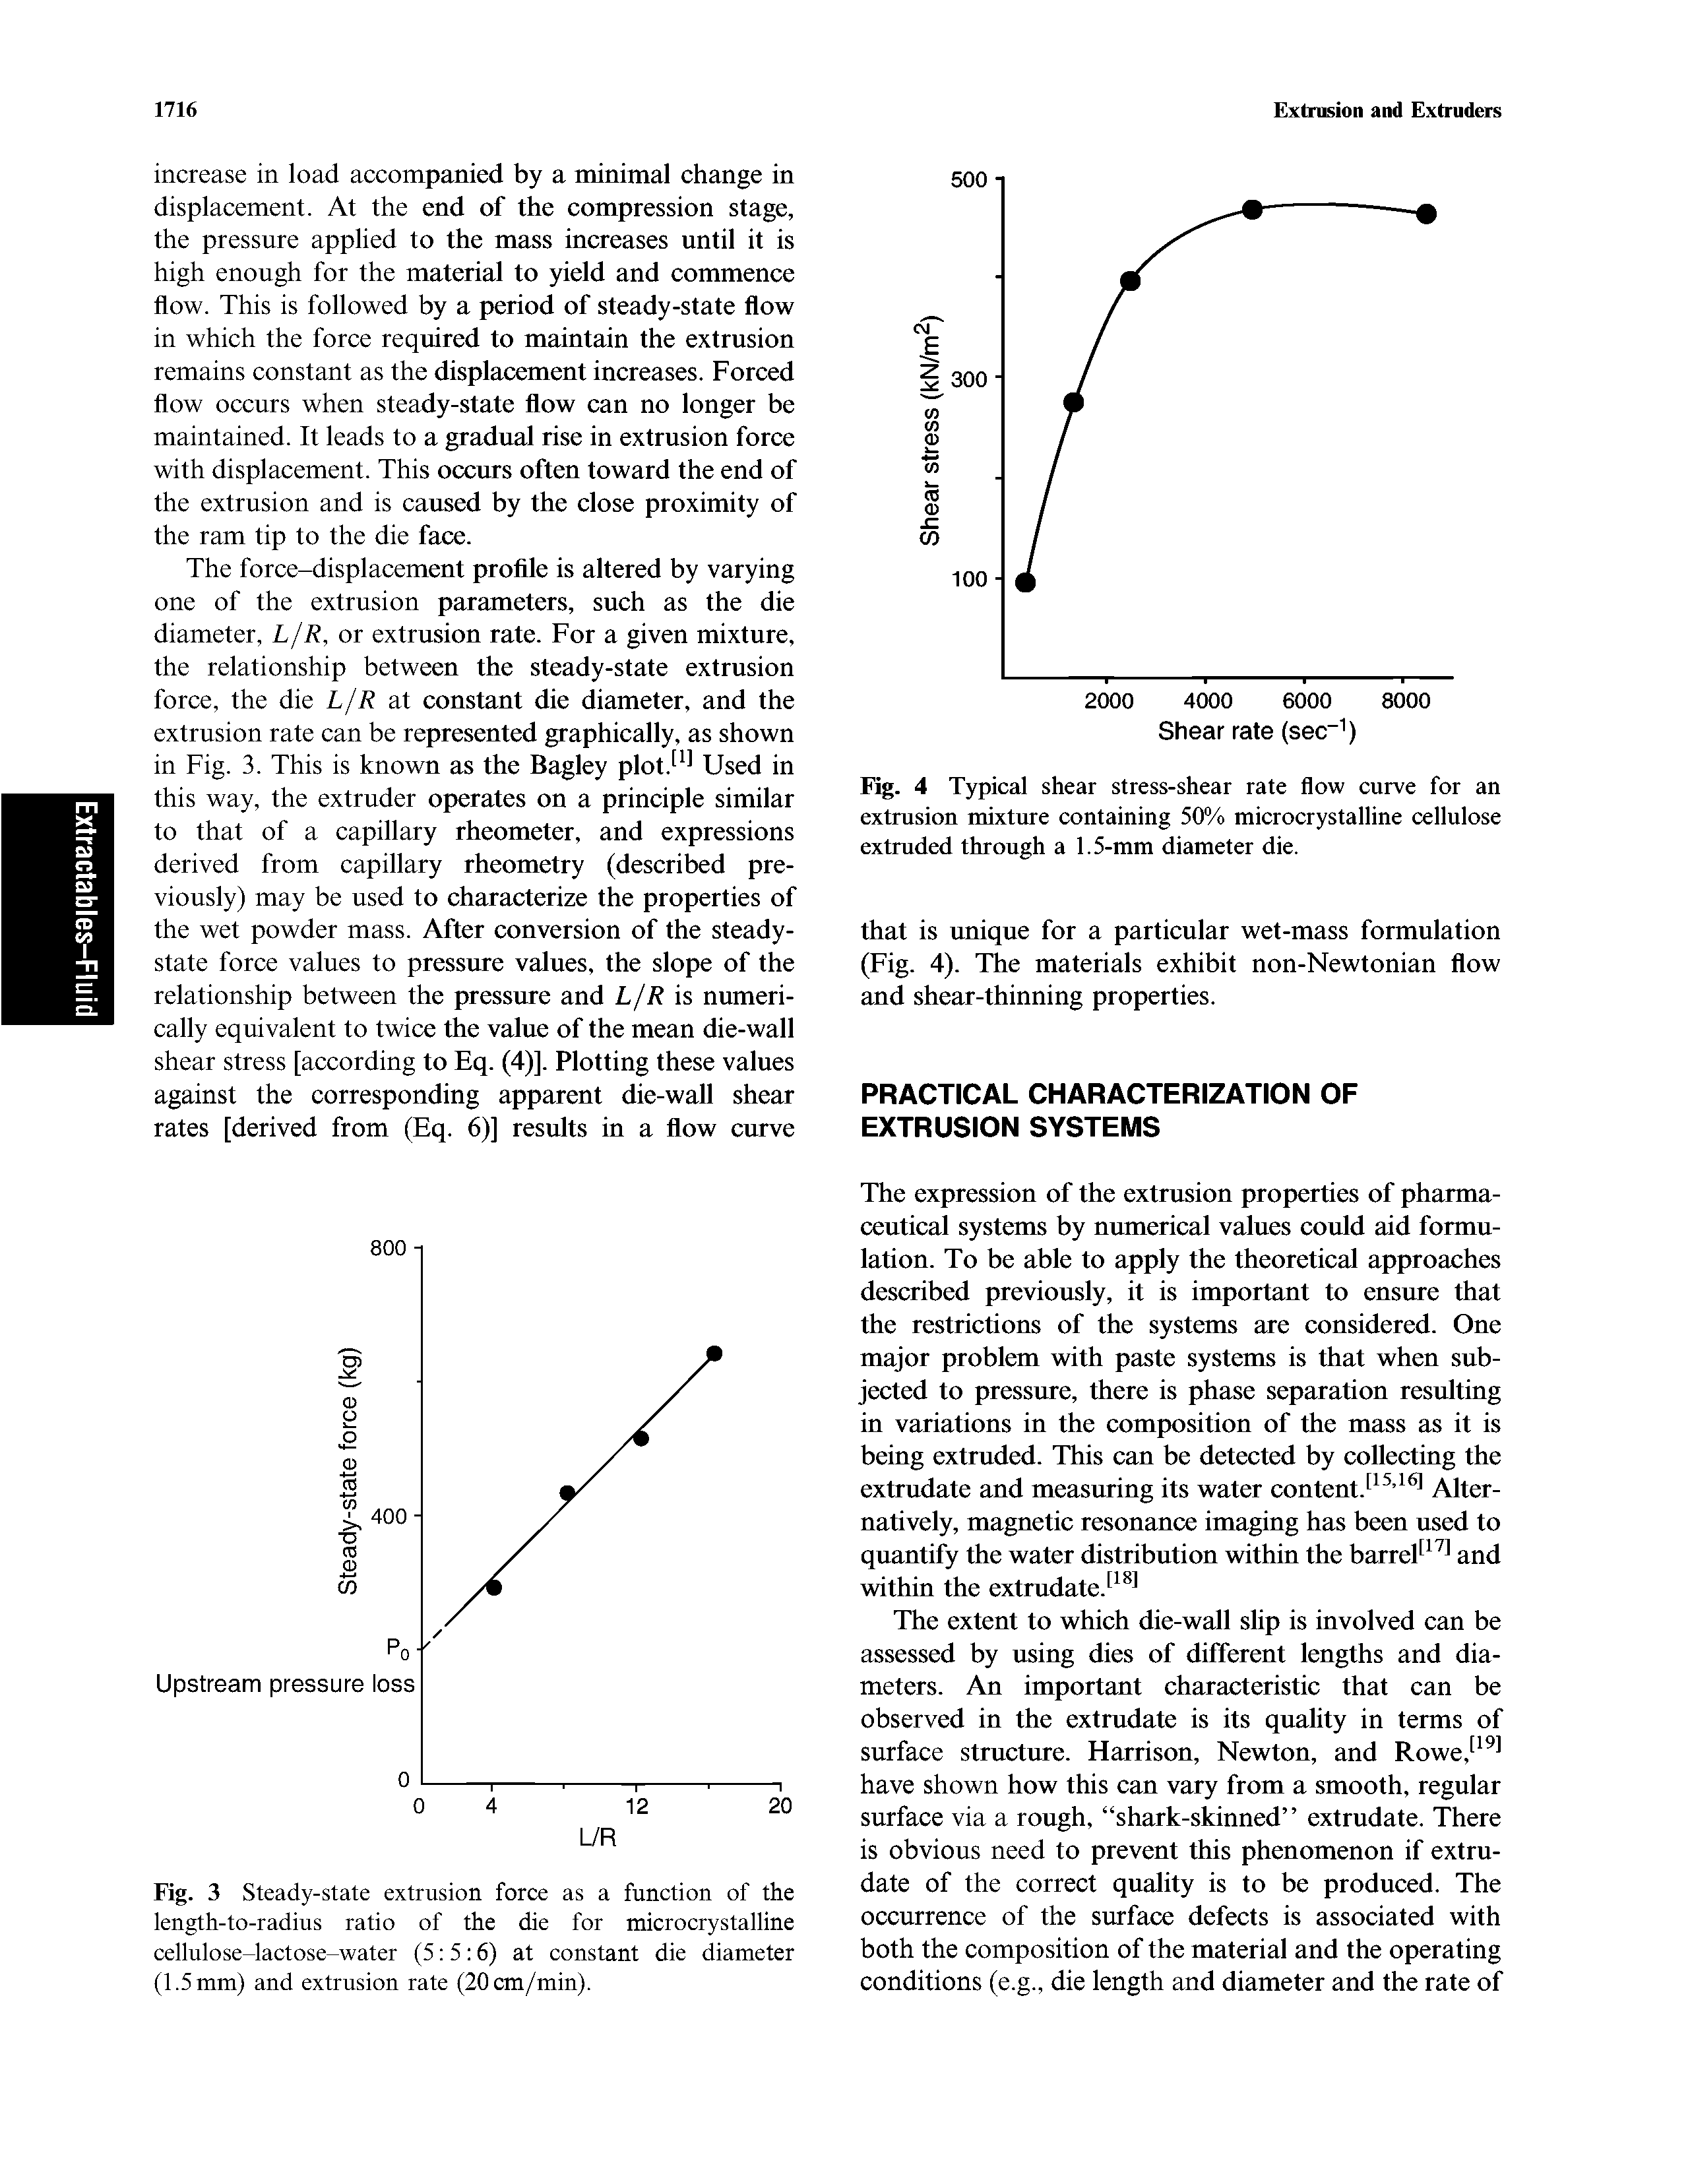 Fig. 4 Typical shear stress-shear rate flow curve for an extrusion mixture containing 50% microcrystalline cellulose extruded through a 1.5-mm diameter die.